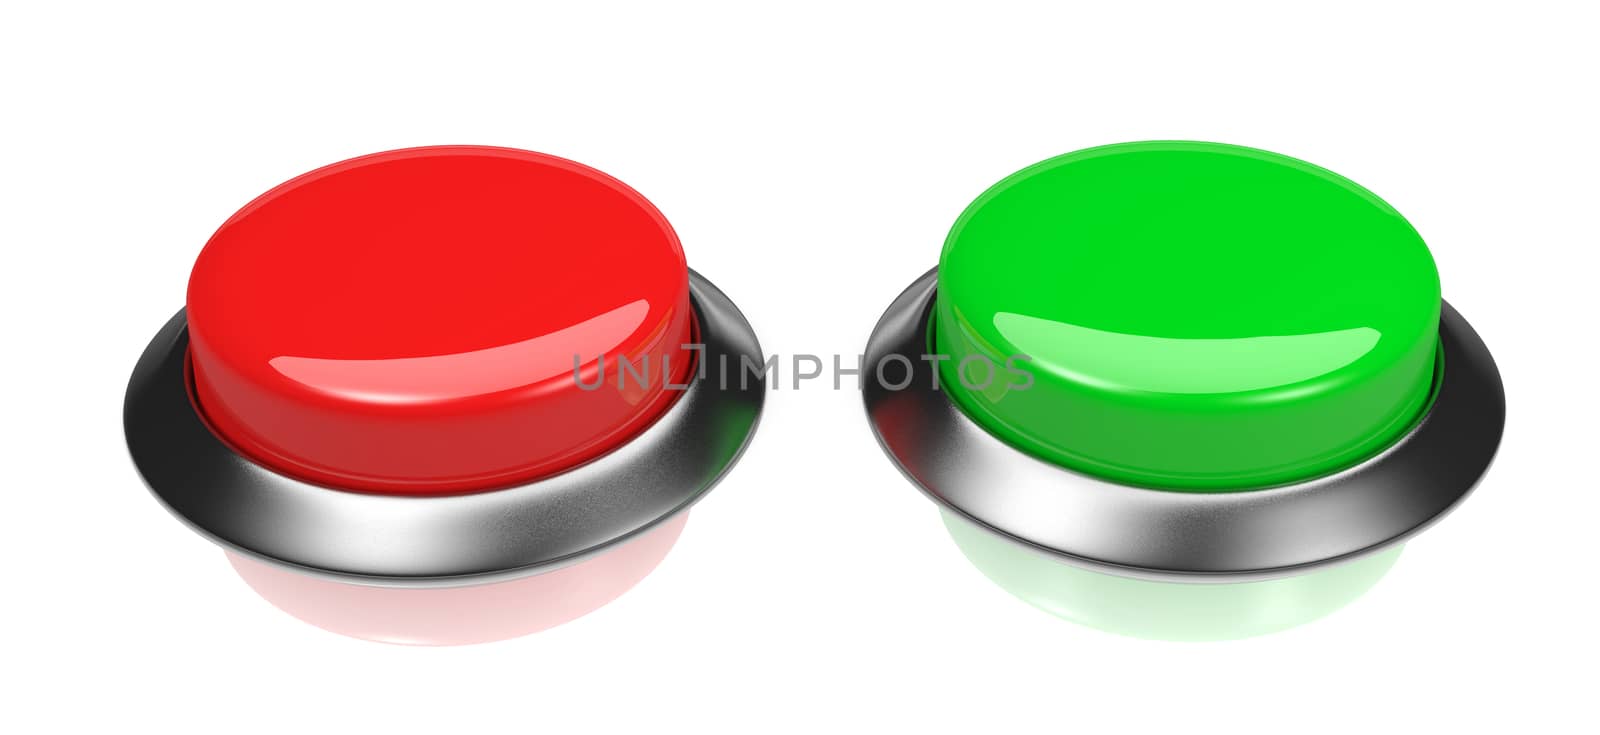 Red and Green Buttons by make